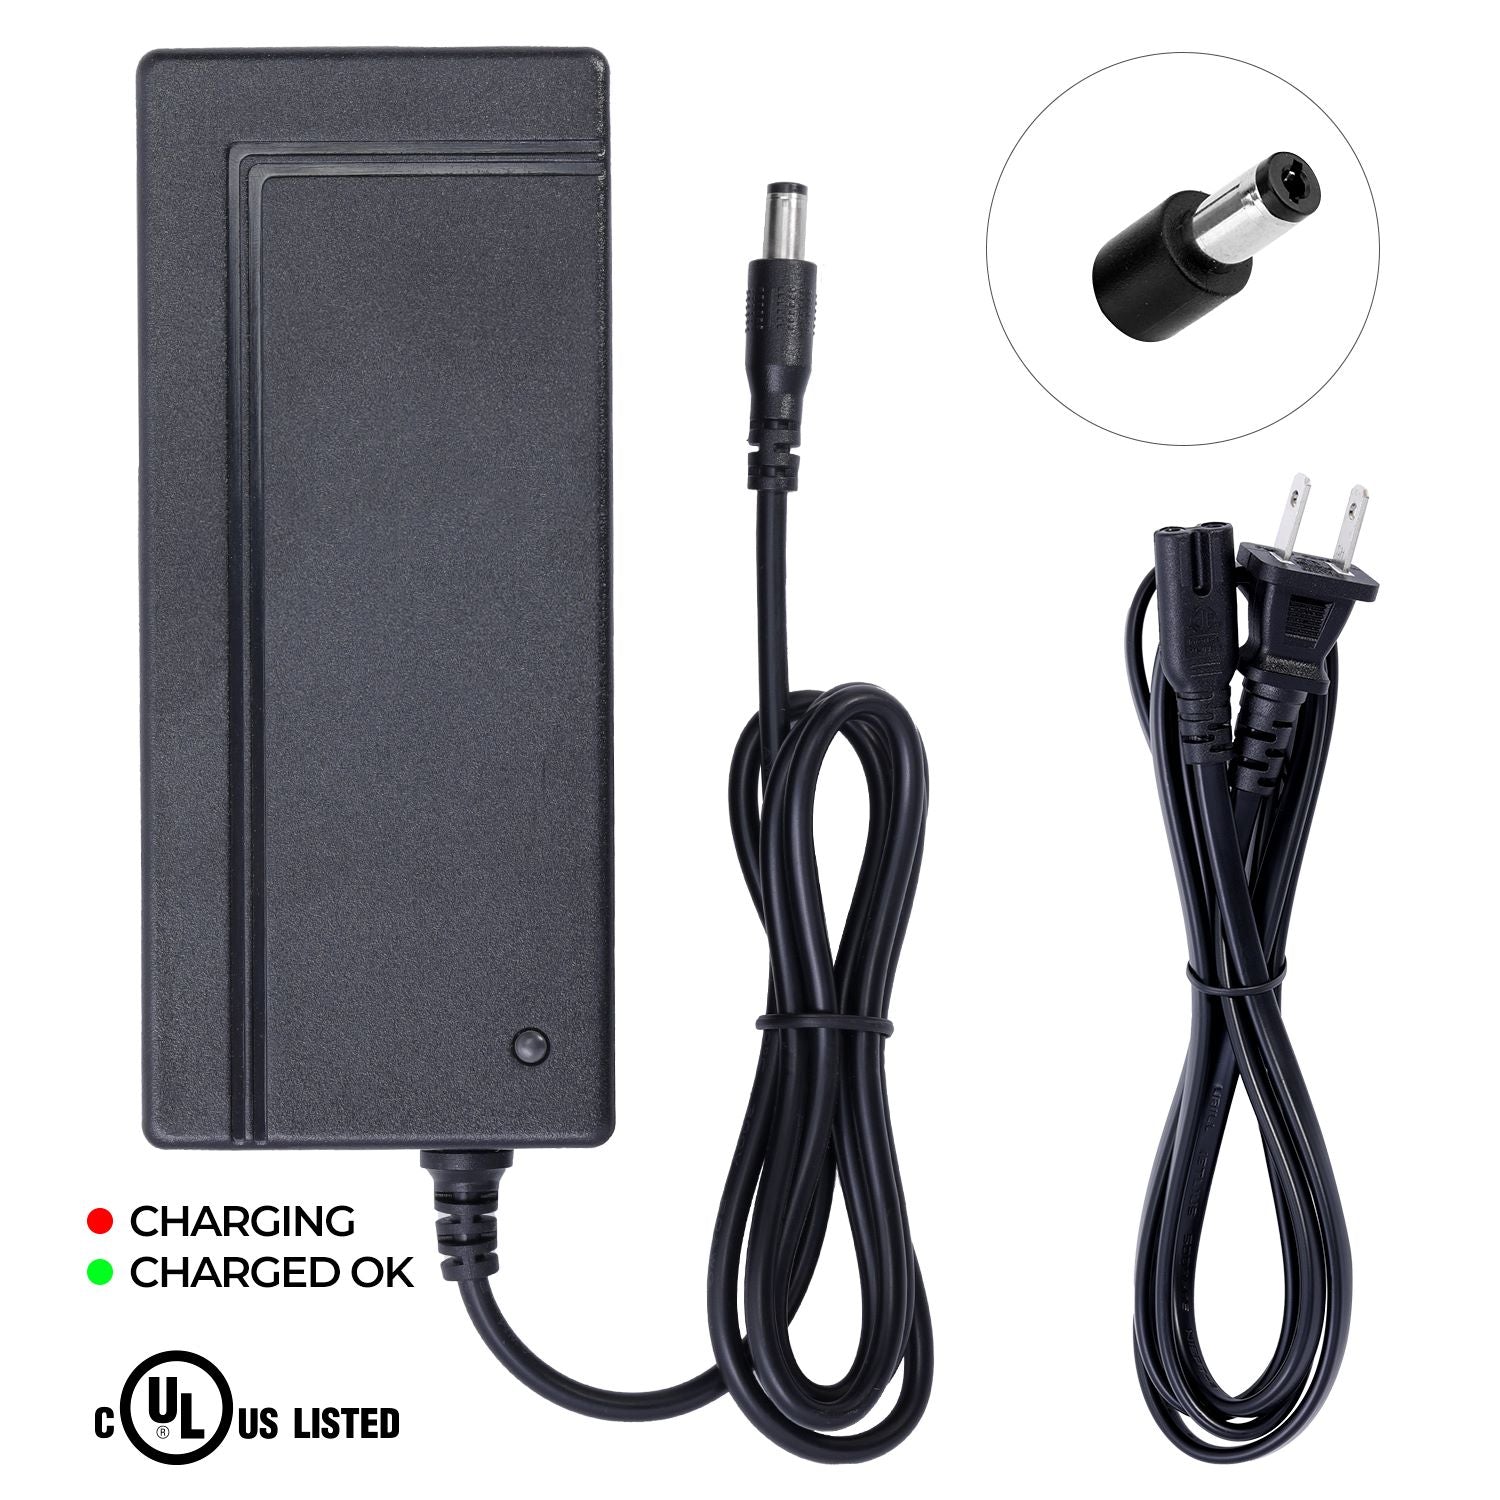 UL Certified Charger for AVENTON SOLTERA 7 Electric Bike (If your AVENTON model is something else, do NOT order it)